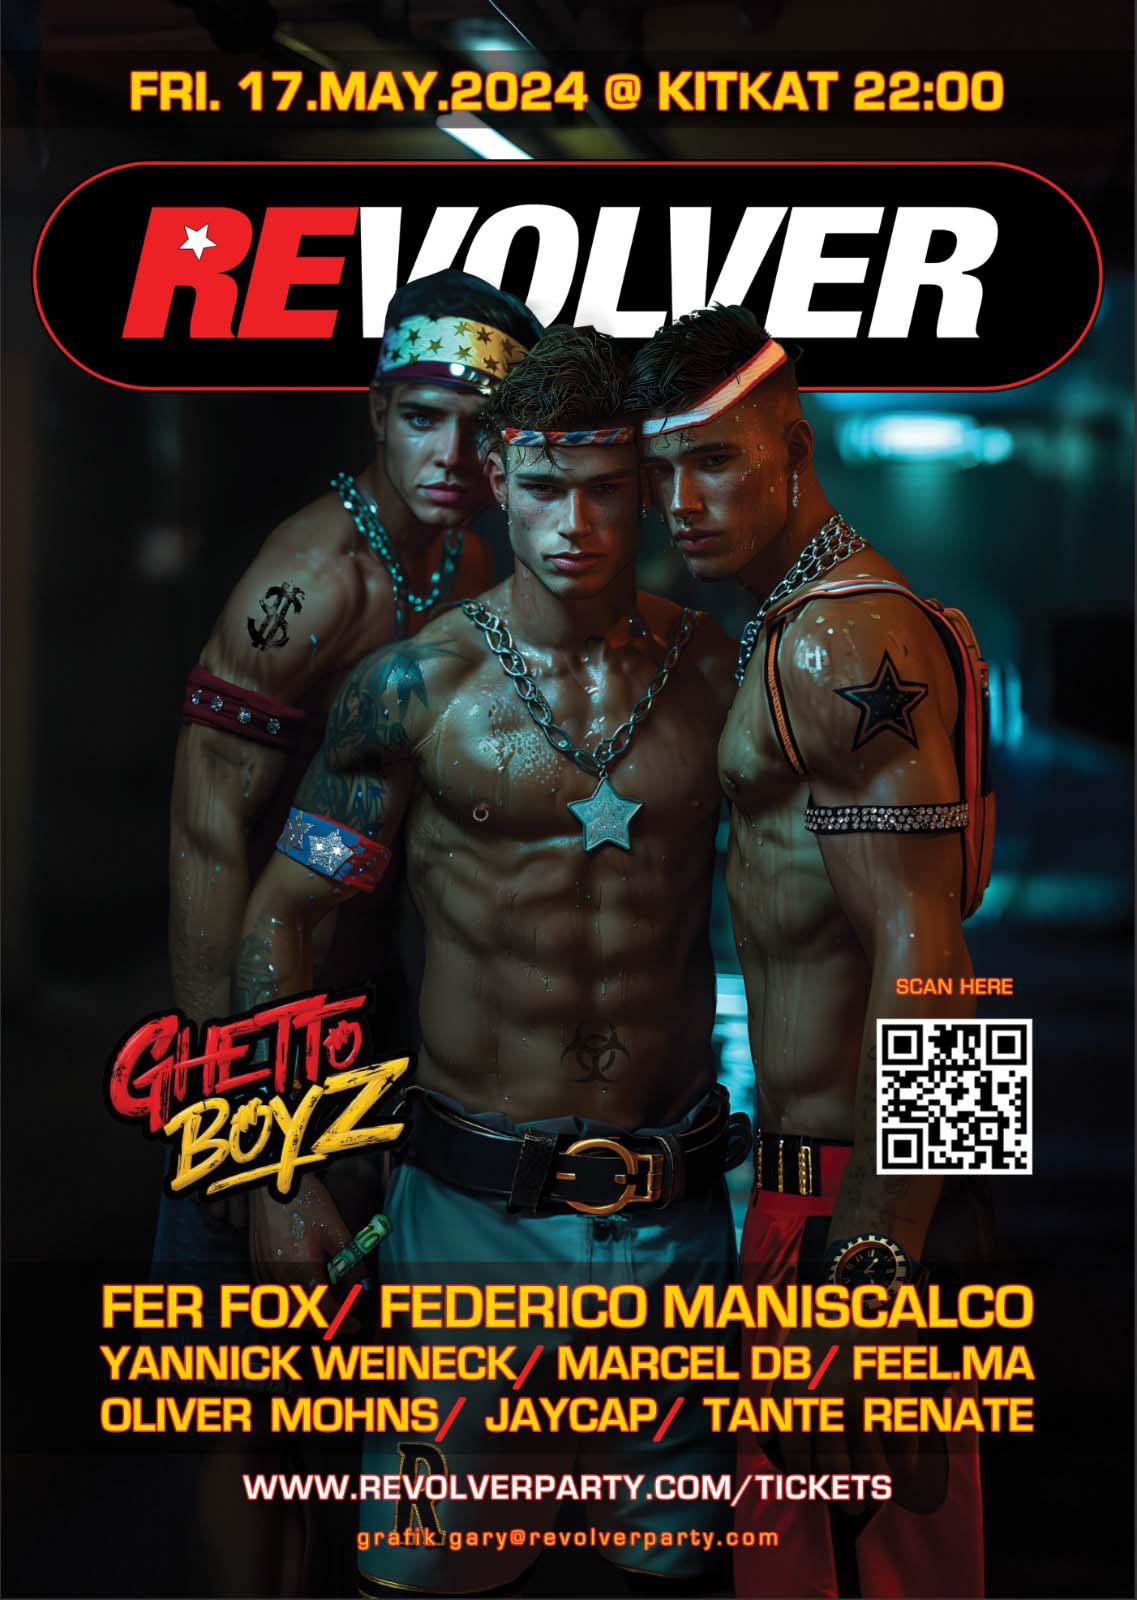 3 shirtless muscled men stand huddled together. Revolver logo at top; text above logo: Friday 17th May 2024 starting at 22:00 in KitKat Club Berlin